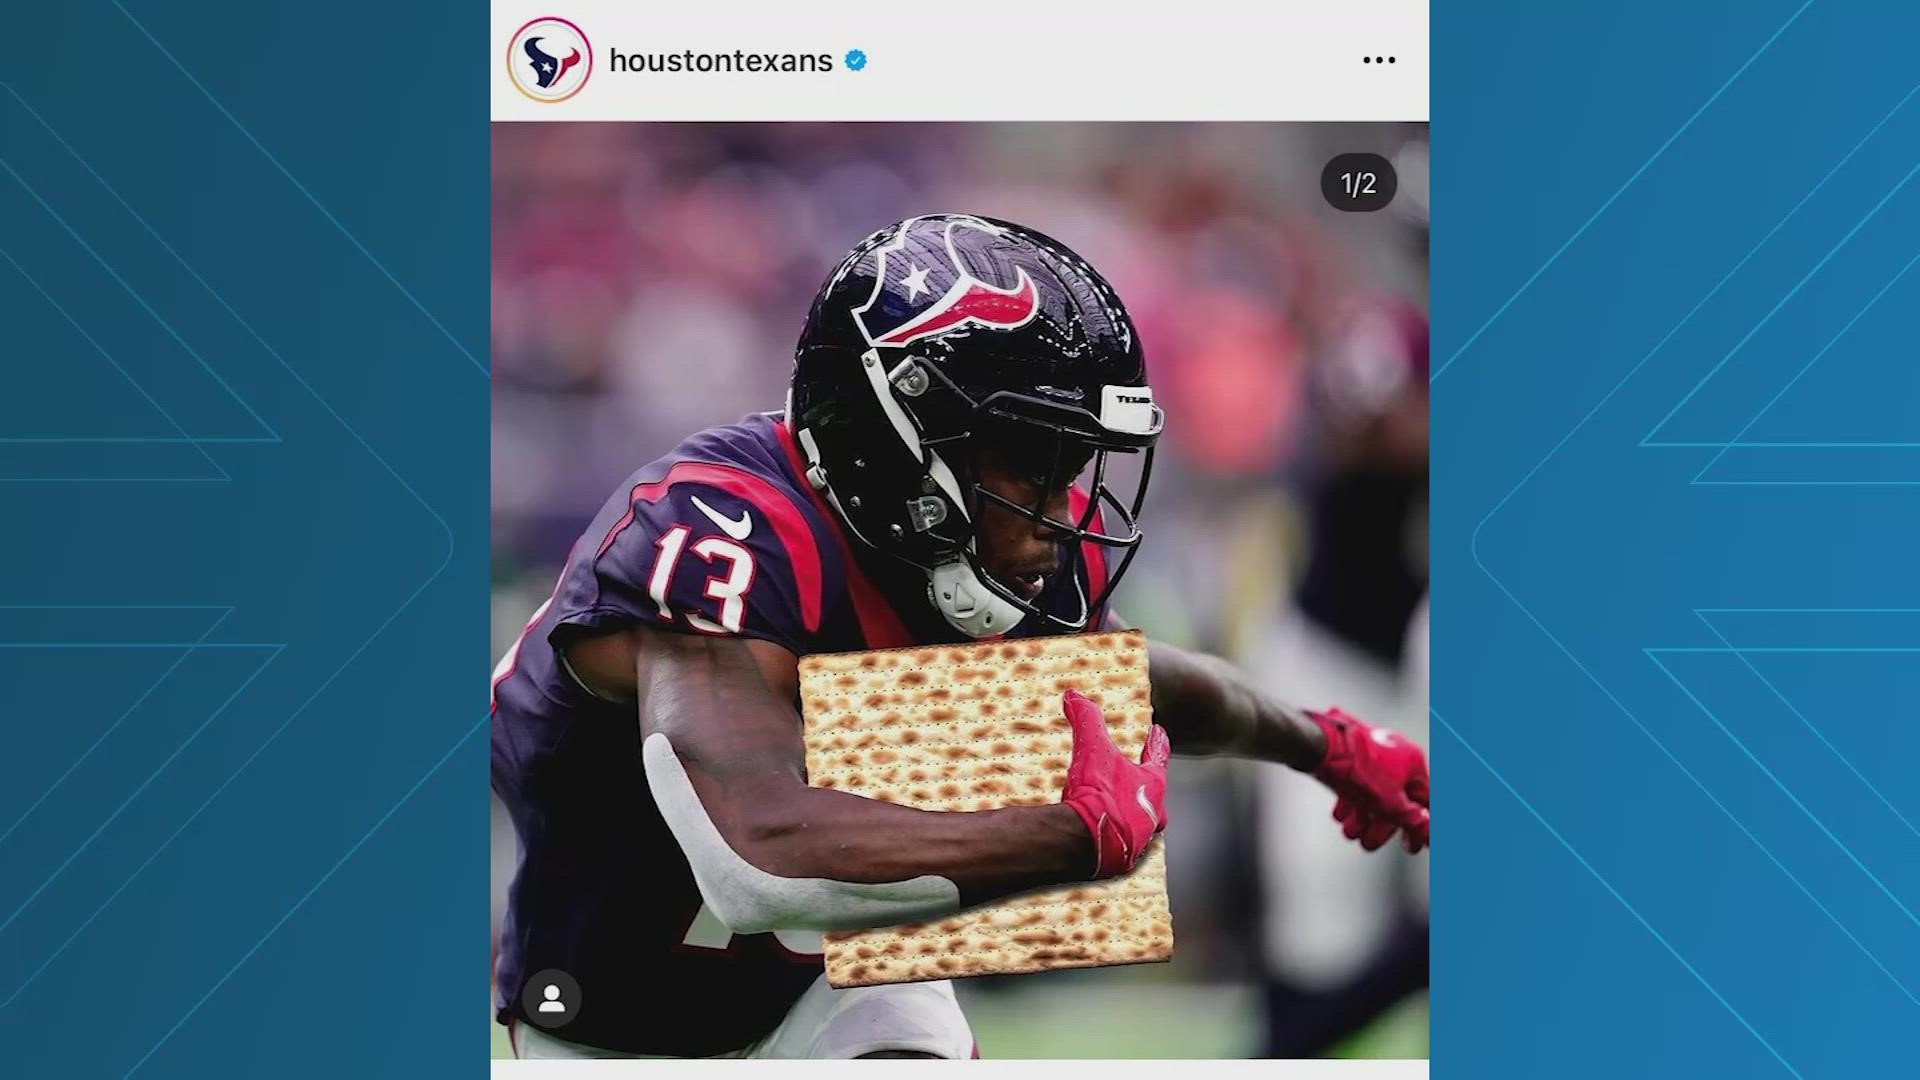 Some believe the Houston Texans fumbled by posting photo-shopped images of two players holding Matzah bread instead of footballs to the team's social media.